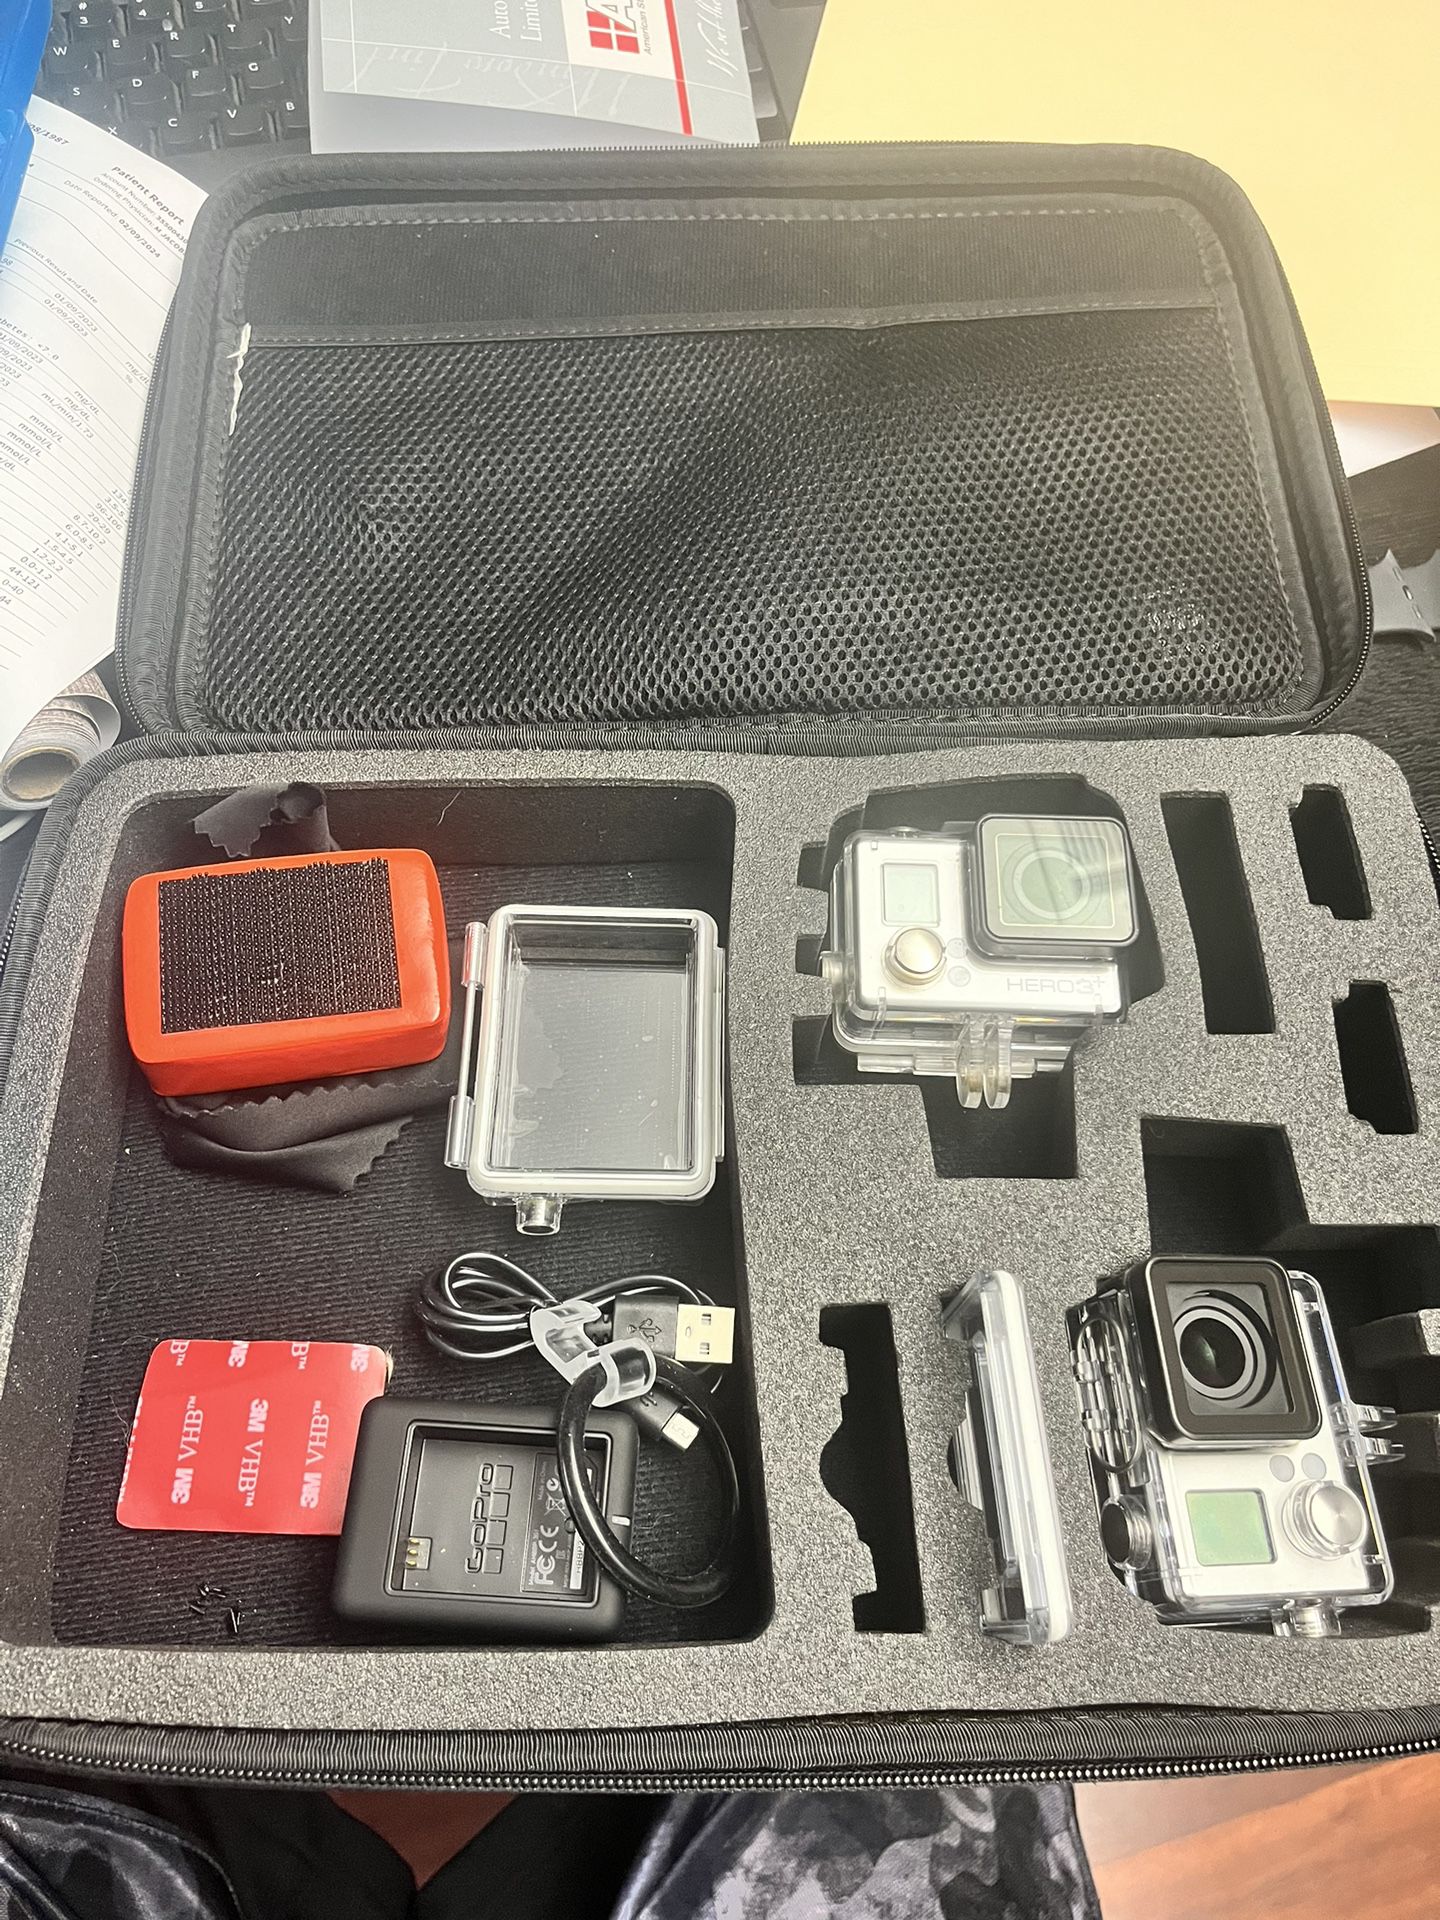 GoPro 3+. (x2) With Accessories 